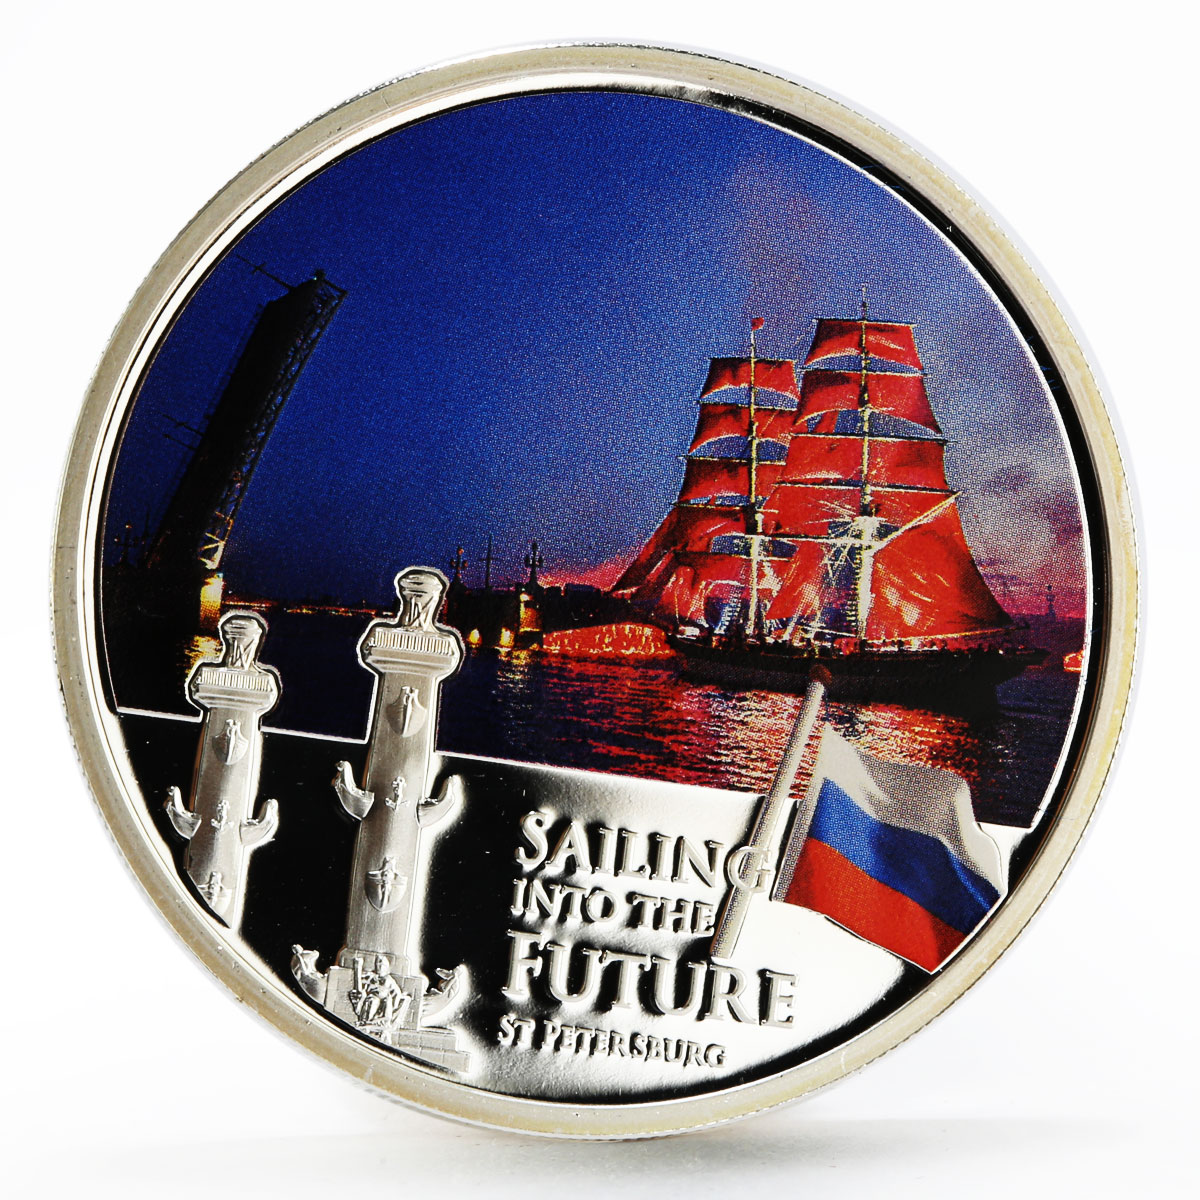 Niue 2 dollars Sailing into the Future Saint Petersburg colored silver coin 2012